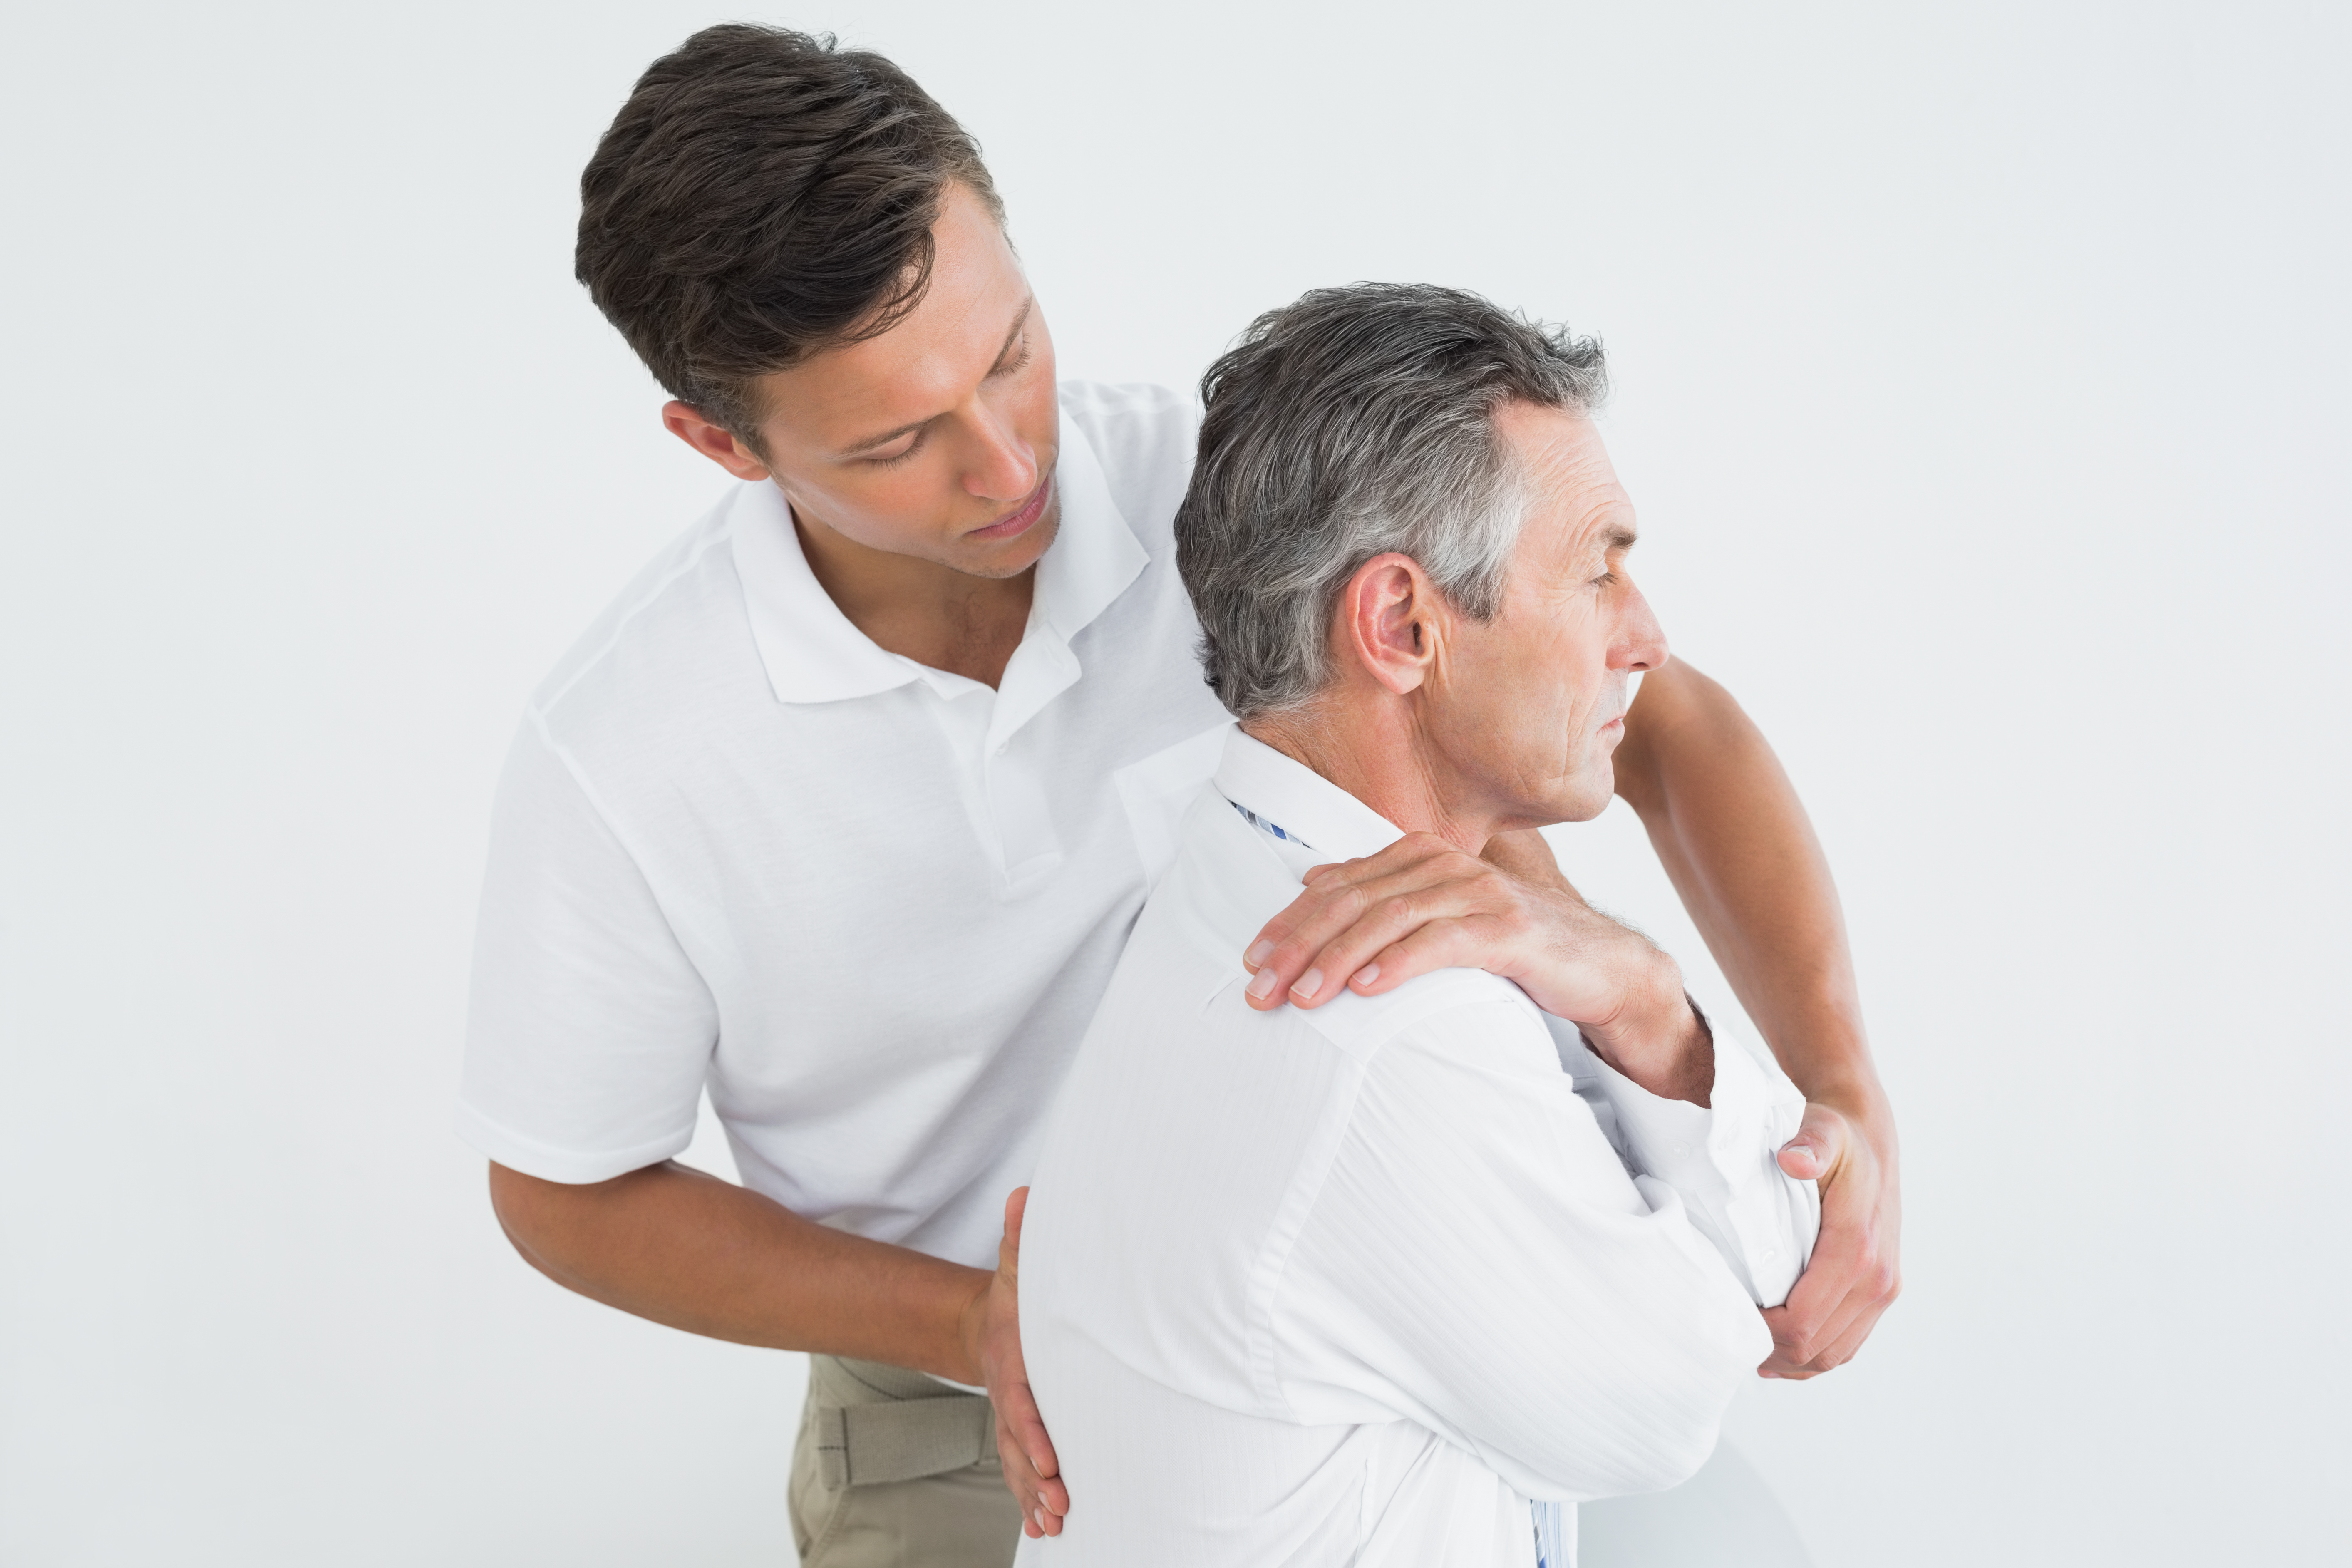 Physical Therapy For Lower Back Pain Relief